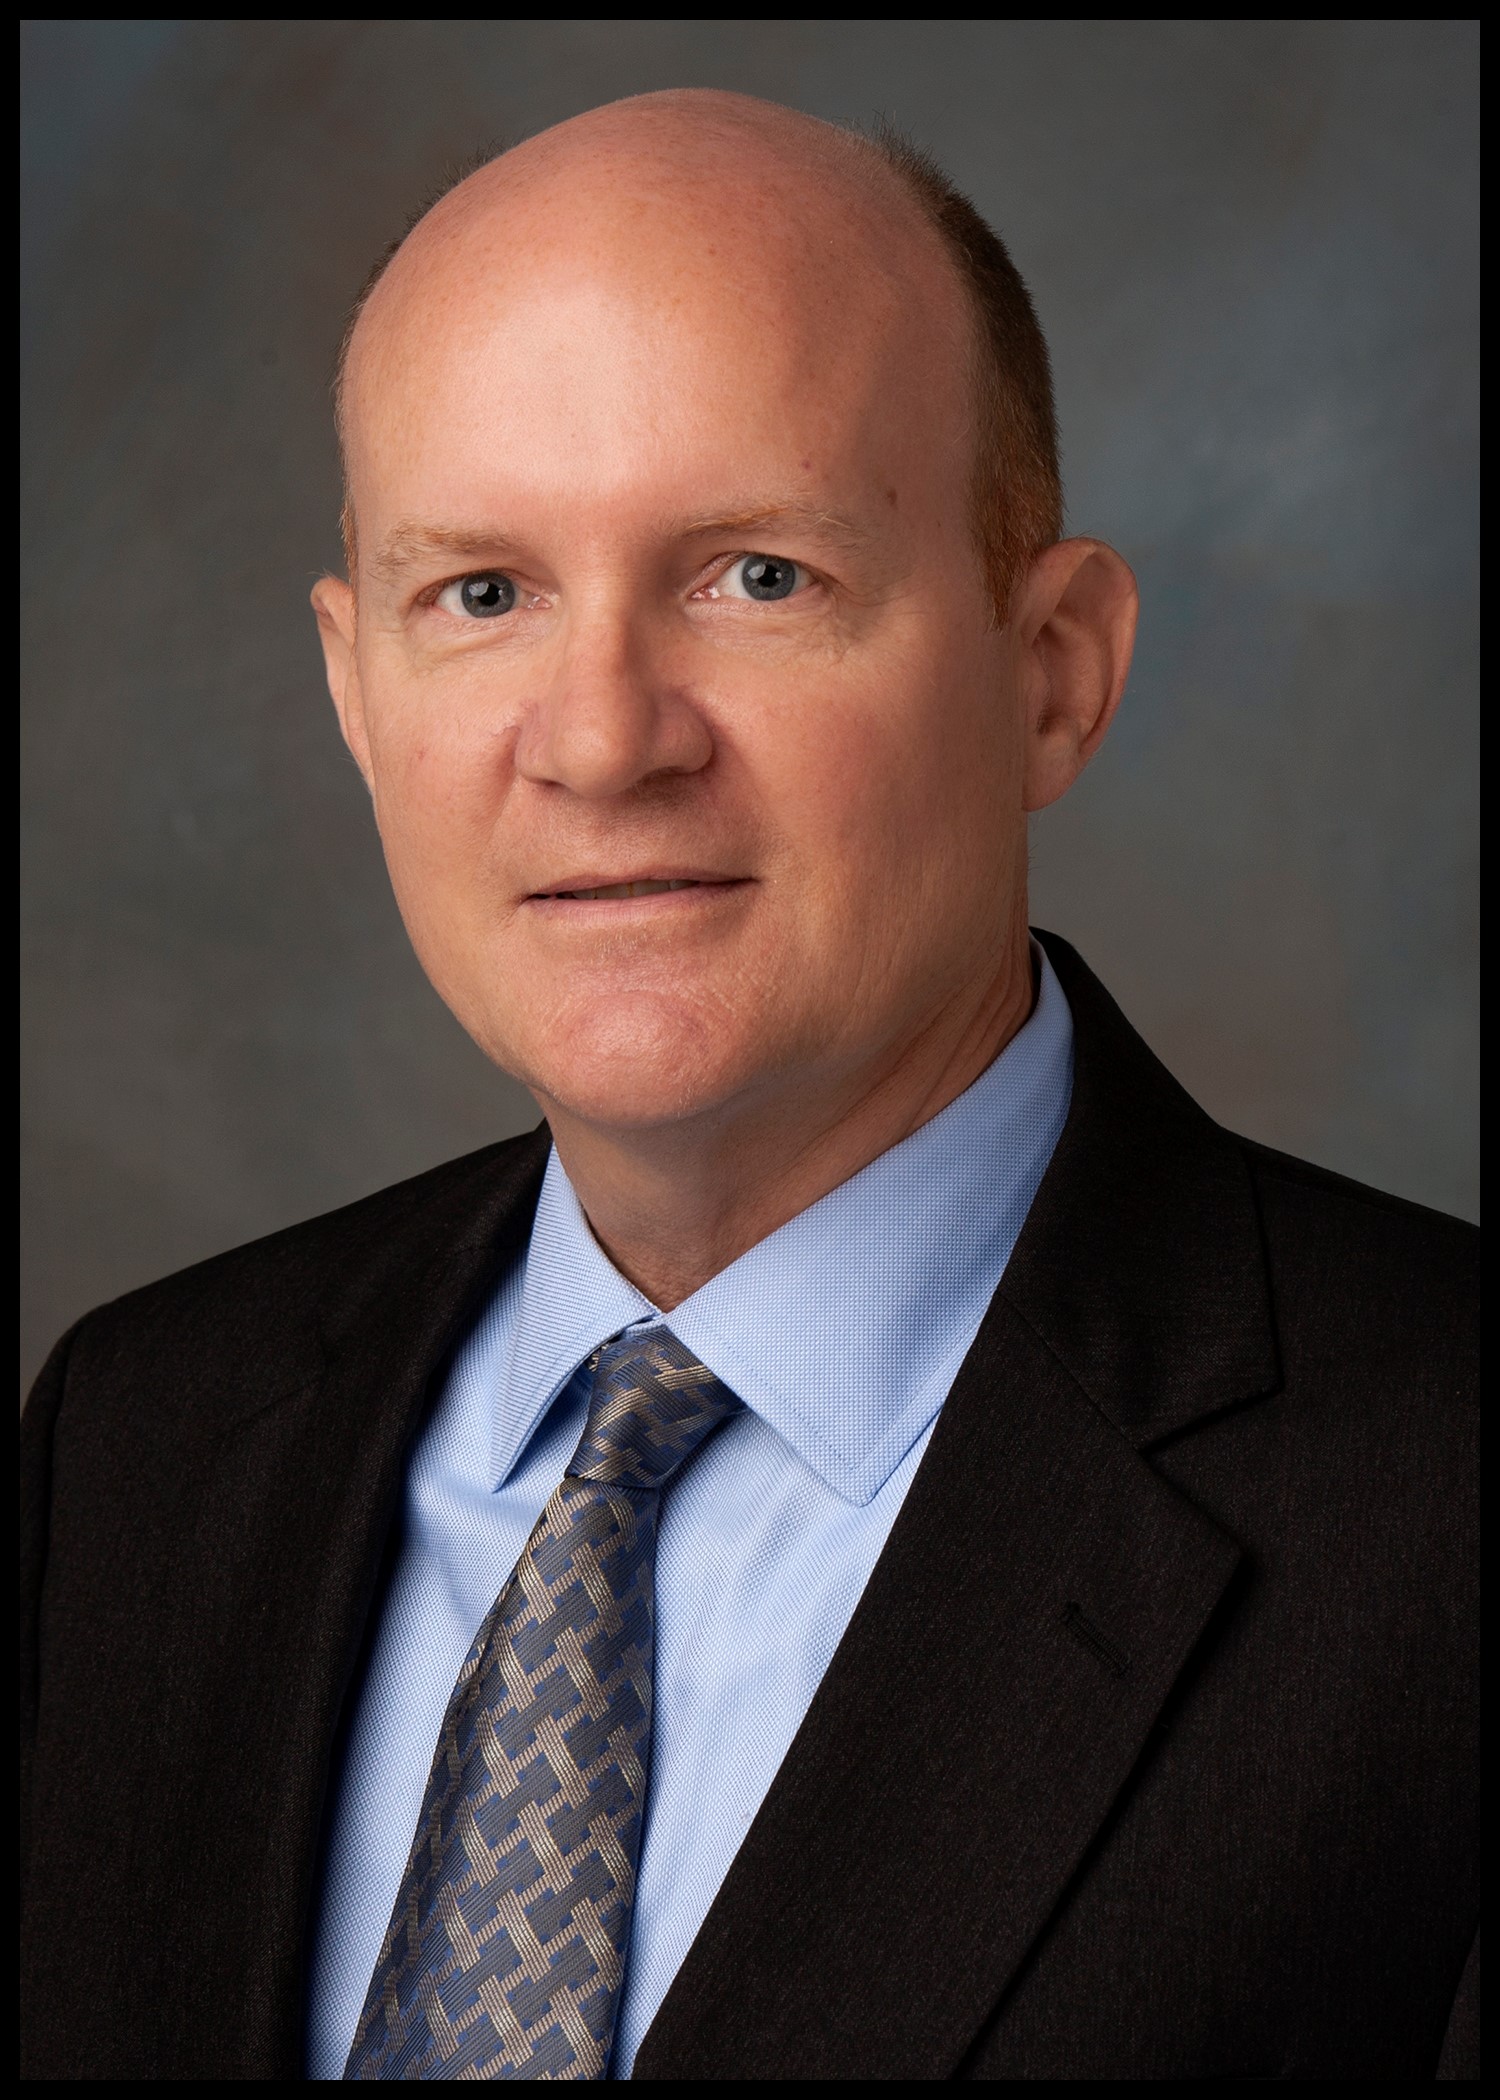 Scott Bombaugh, Chief Technology Officer and Executive Vice President